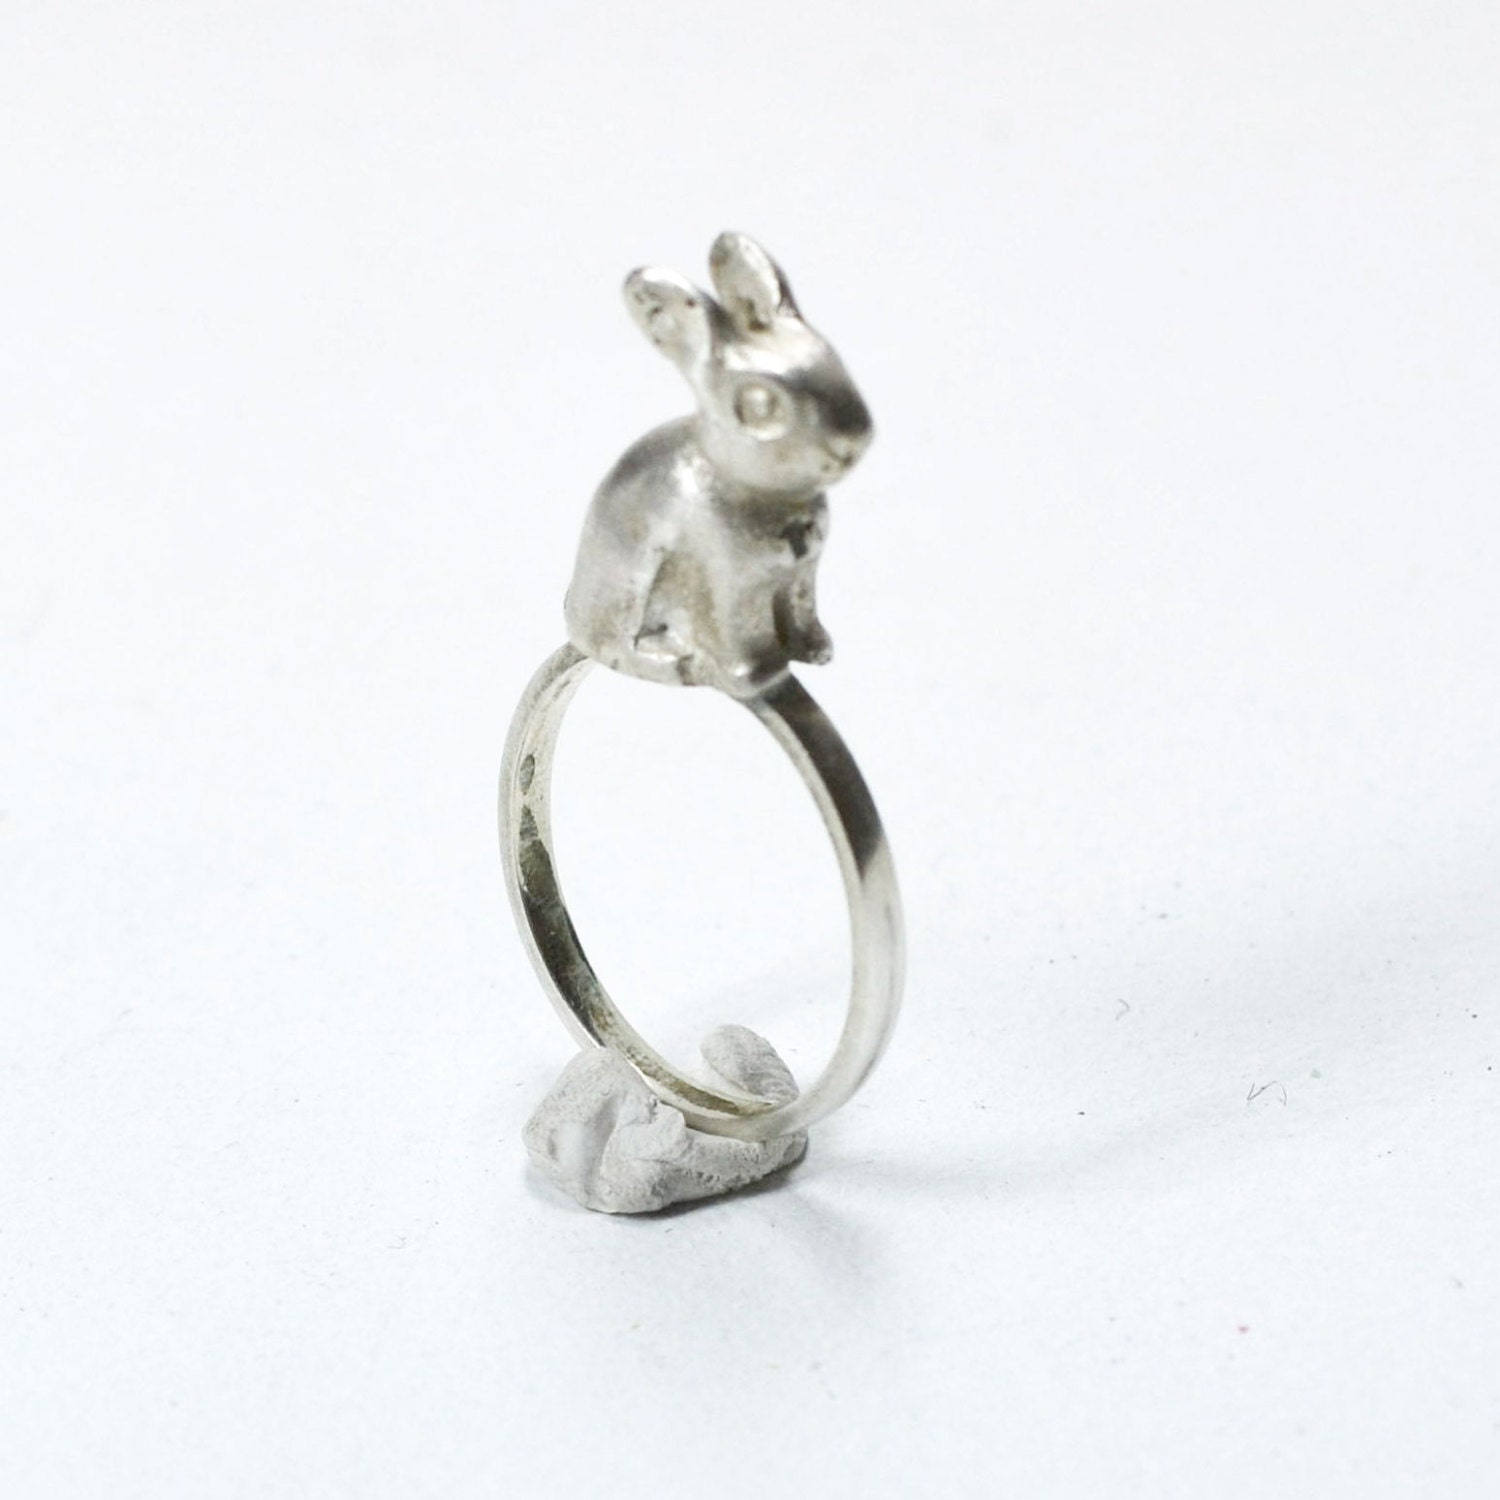 Silver Ring with Rabbit on top – Etsy finds